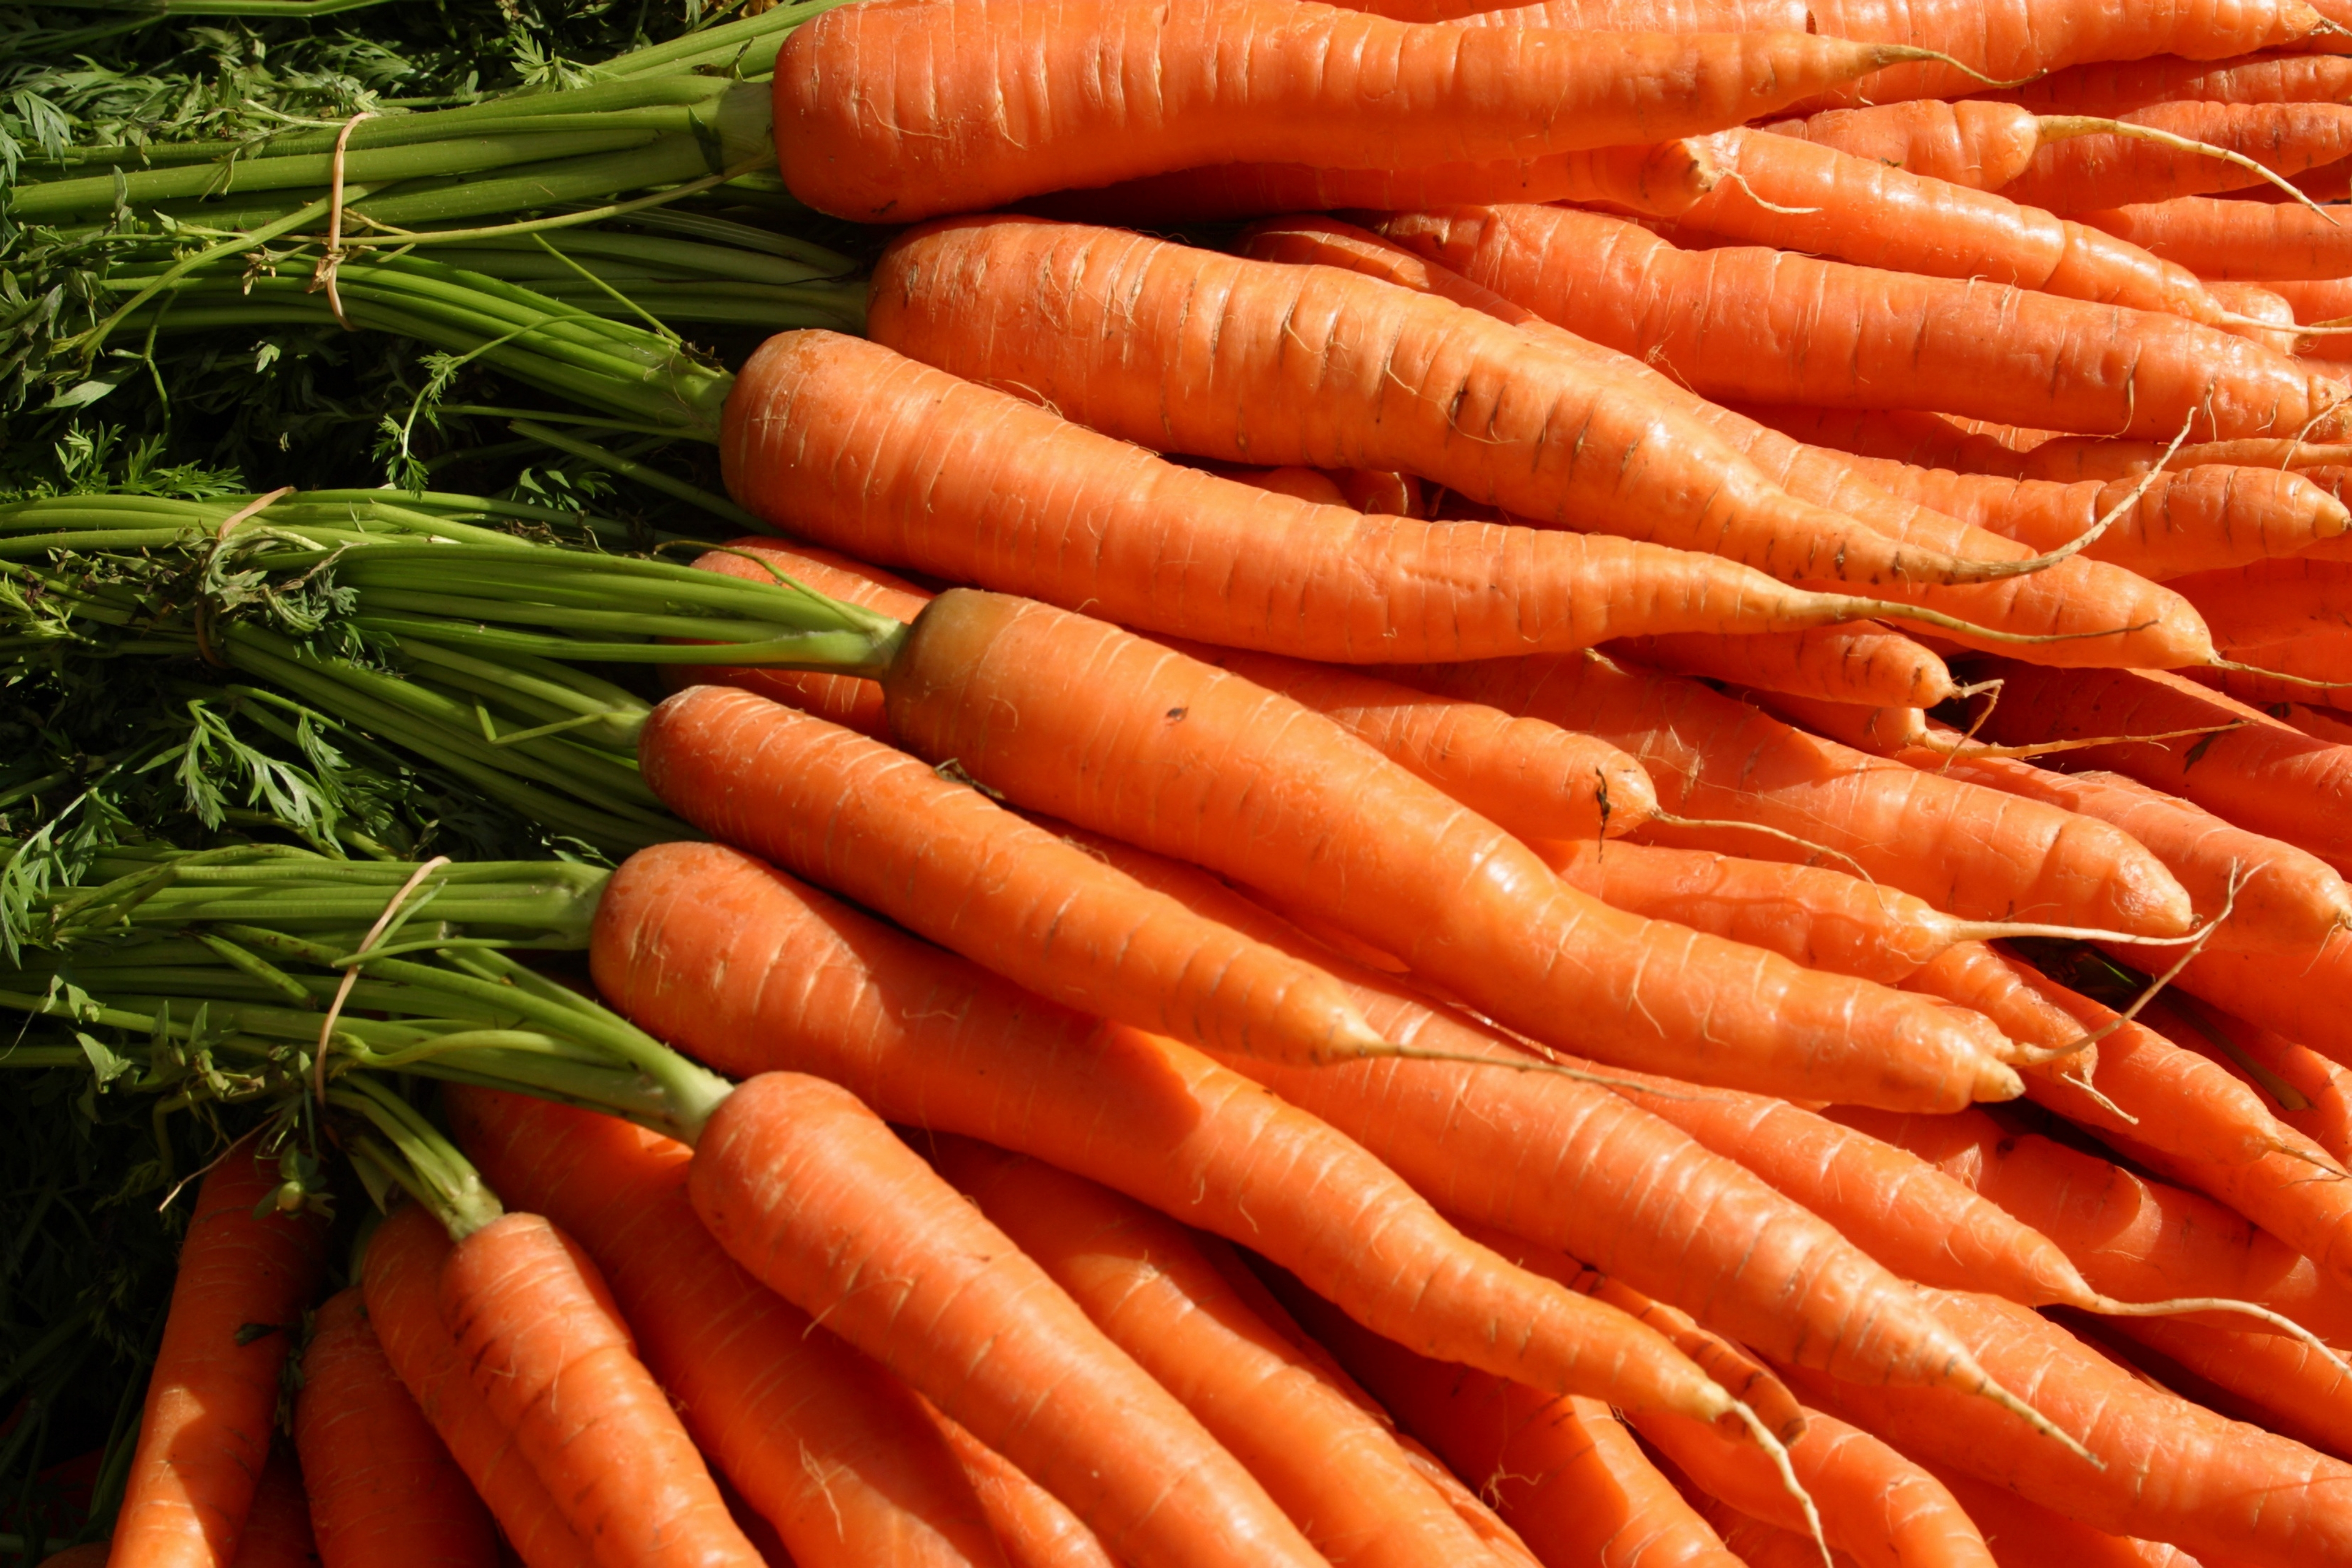 Several bunches of carrots.